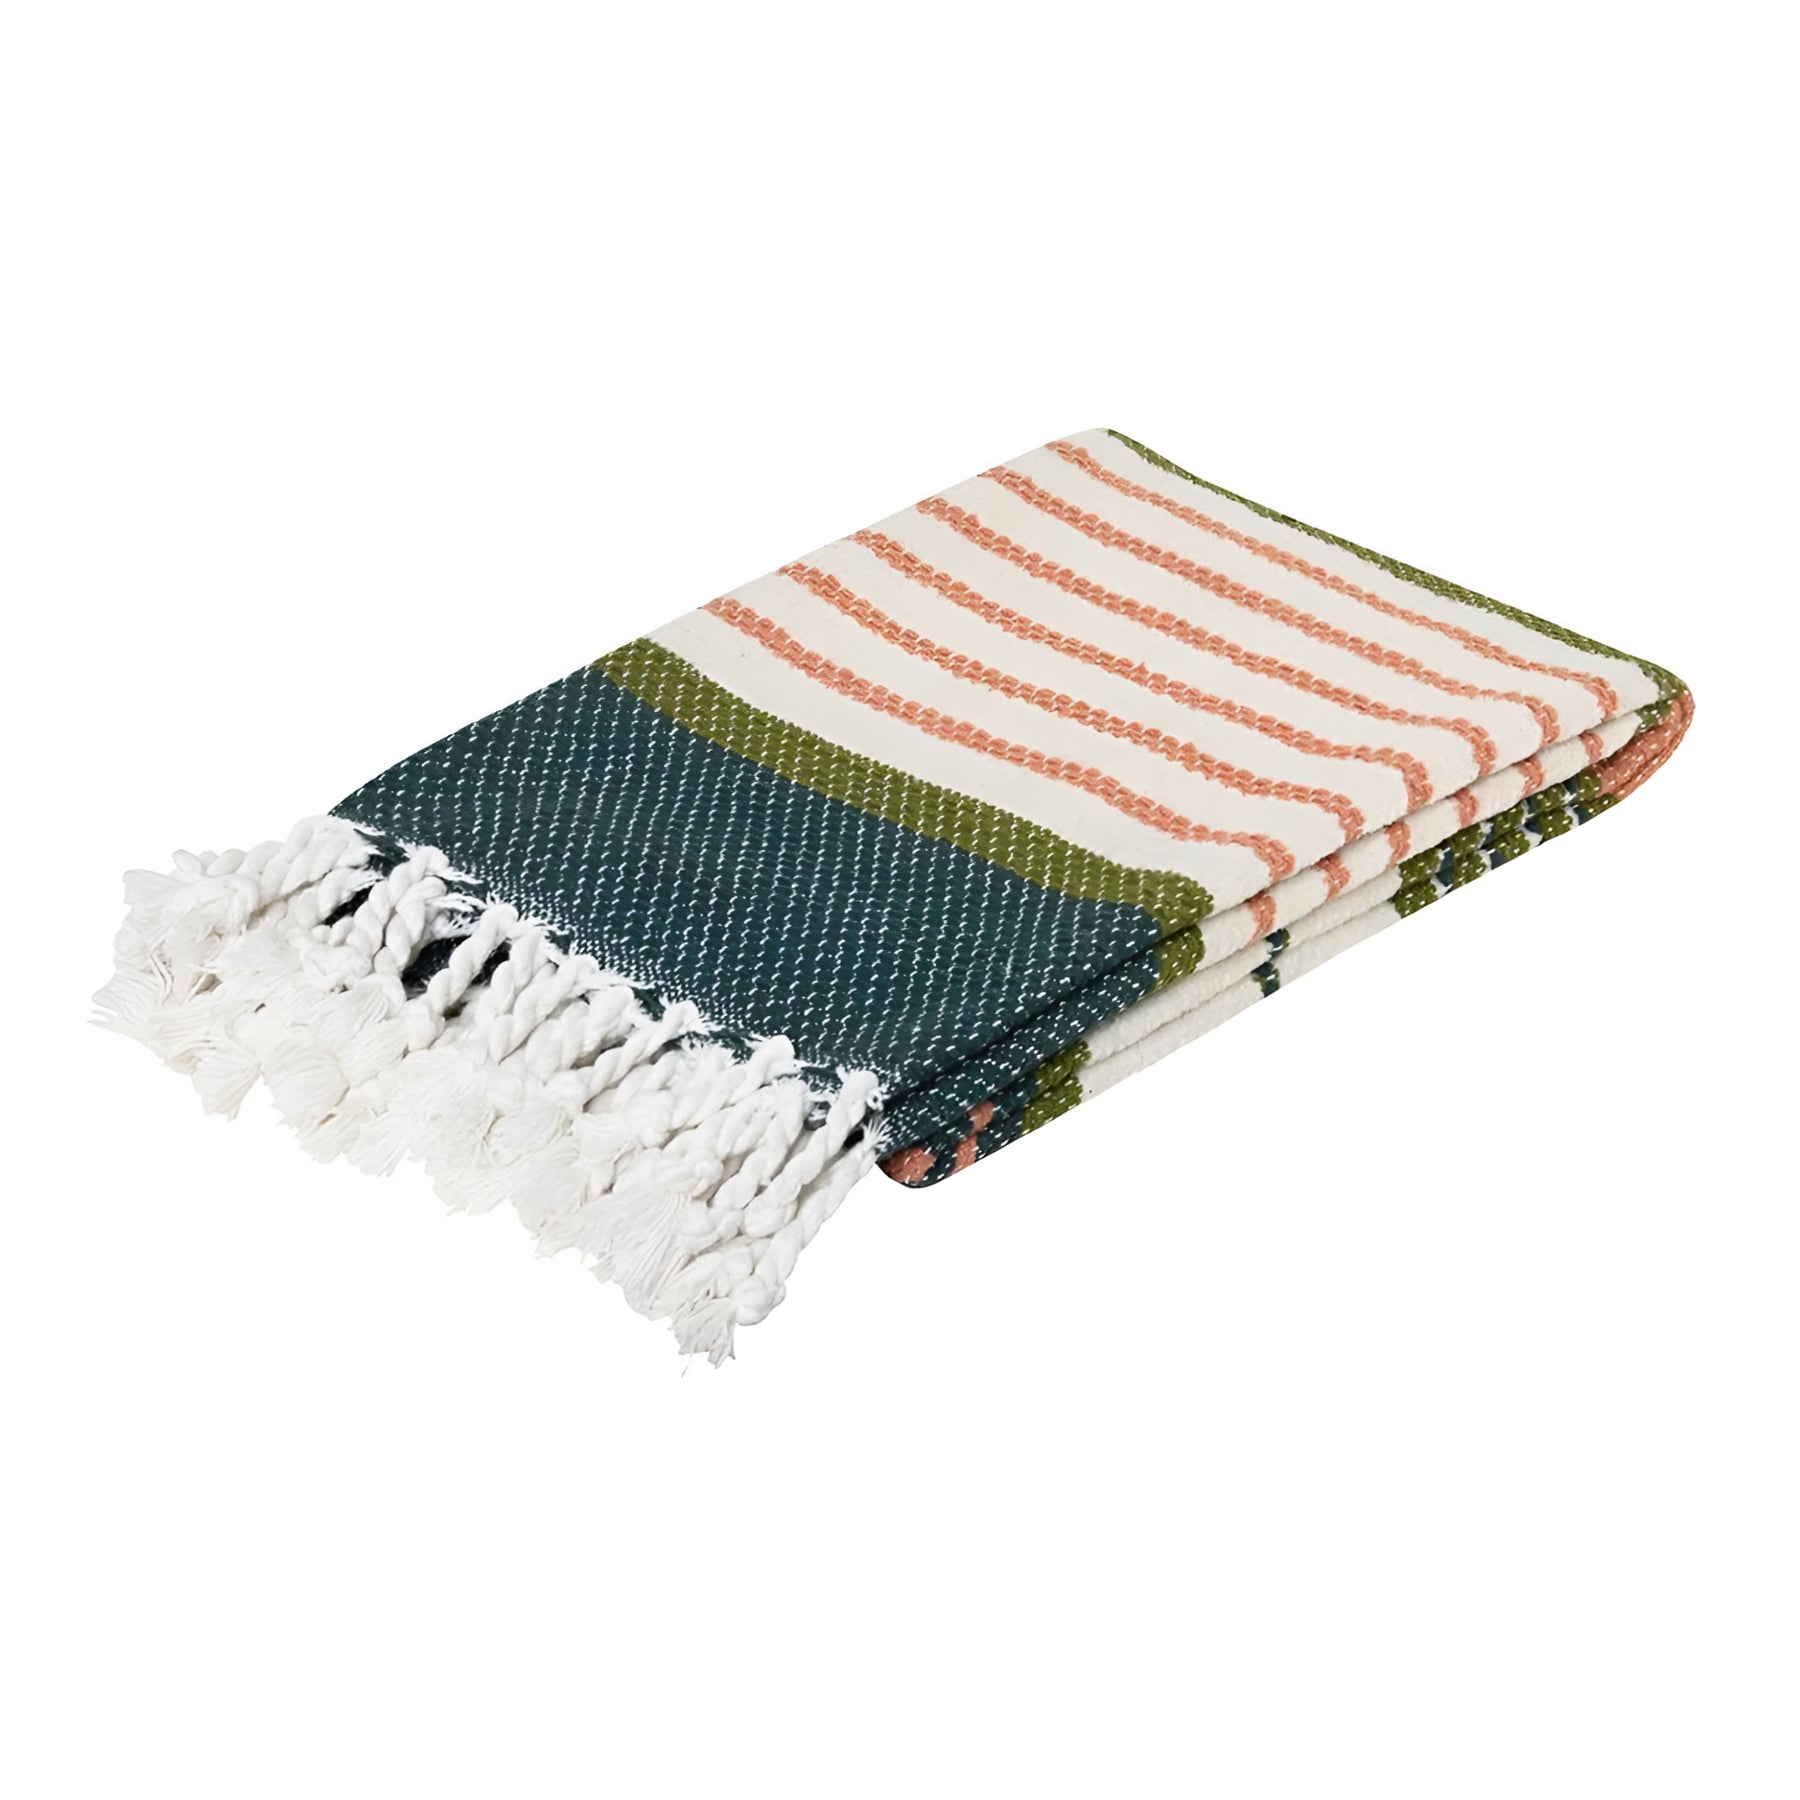 Folded Zephyr throw blanket showing green, white, and peach stripes with textured tassels.